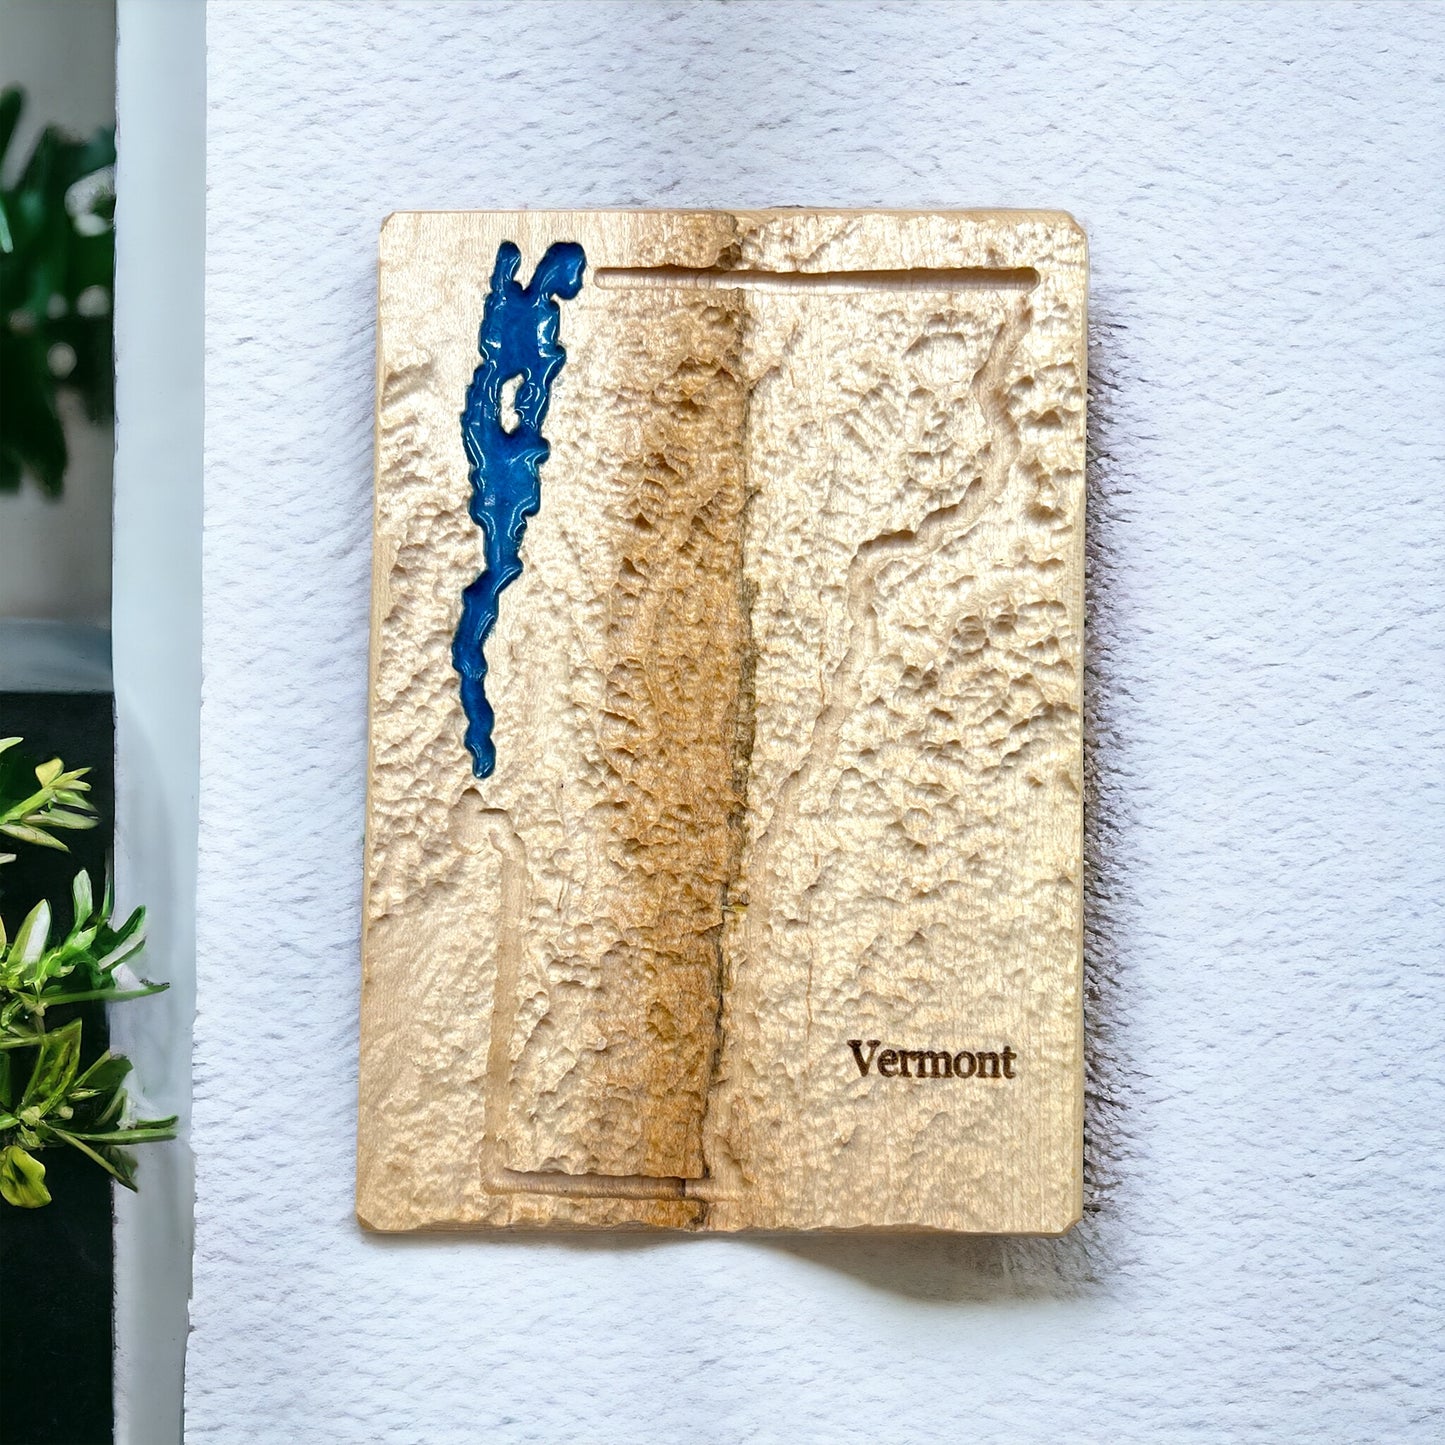 Vermont 3D Relief Map | Vermont Wood Epoxy Art | New York | Vermont | Aerial View Lake Map | Gift for Husband | Travel Gift